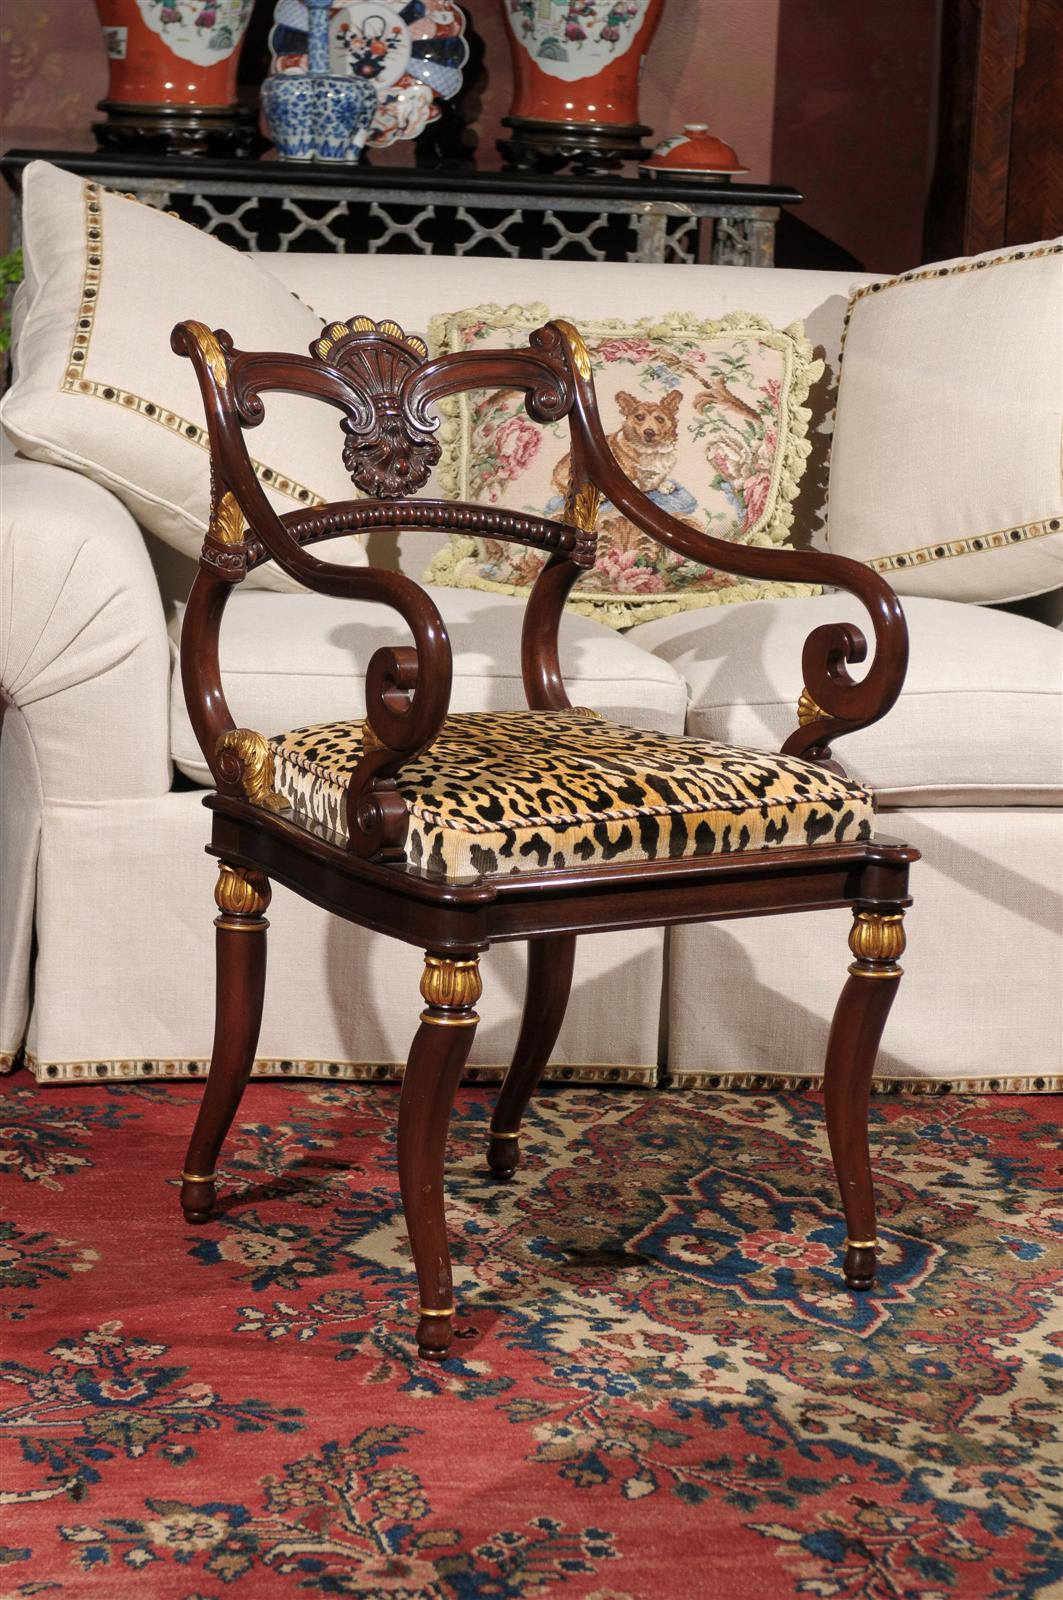 This is a beautiful elegant armchair. Could be a perfect desk chair or stand alone. It was made by Smith and Watson Cabinetmakers , New York. Notice the beautiful carved shell on the back of the chair. The seat in upholstered in an animal print